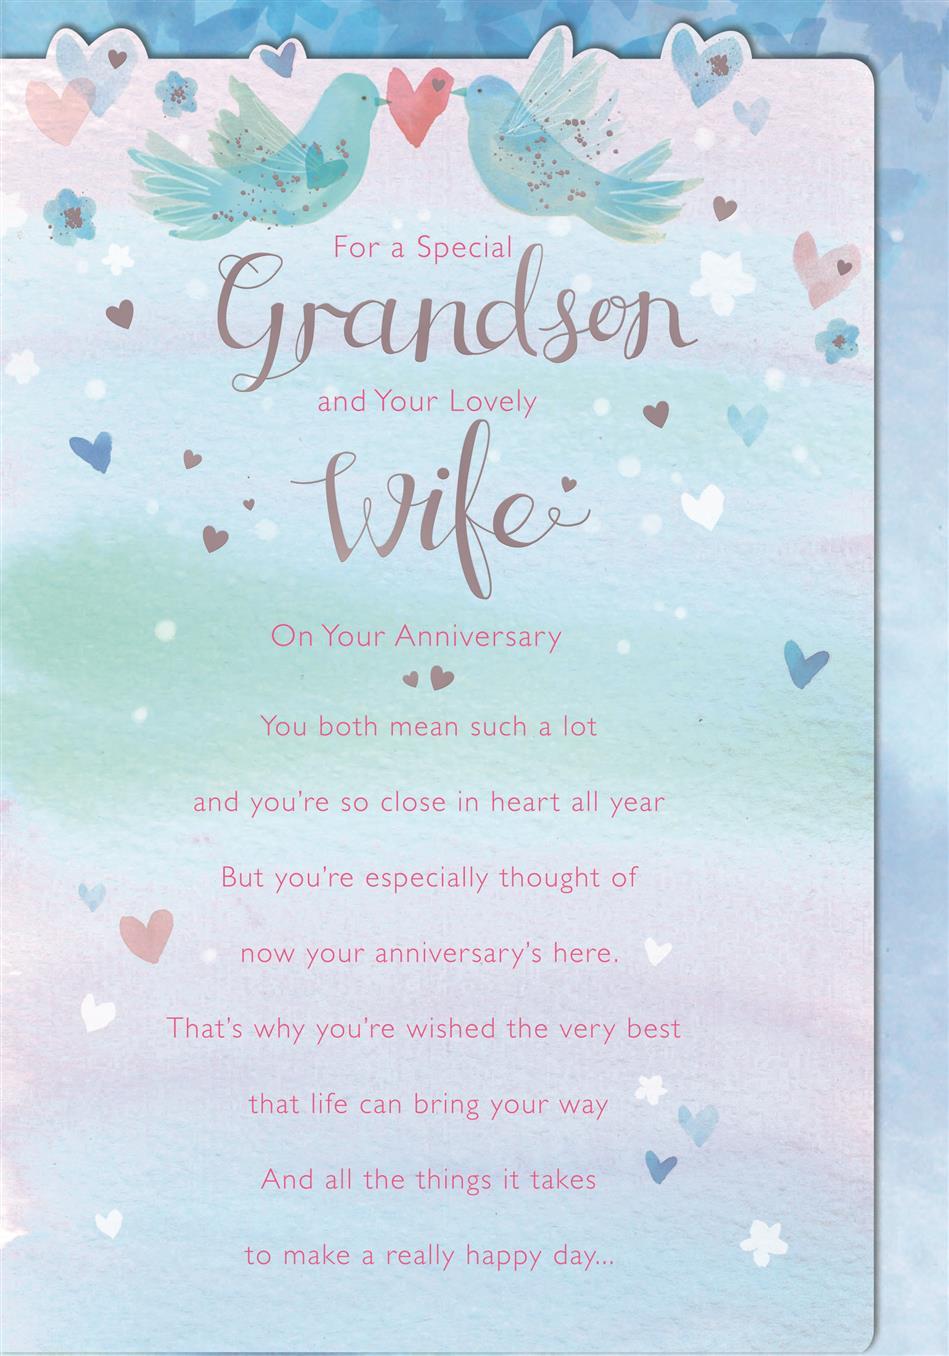 Grandson & Wife Anniversary Card - Celebrating Your Special Day with Birds of Love and Heartfelt Wishes